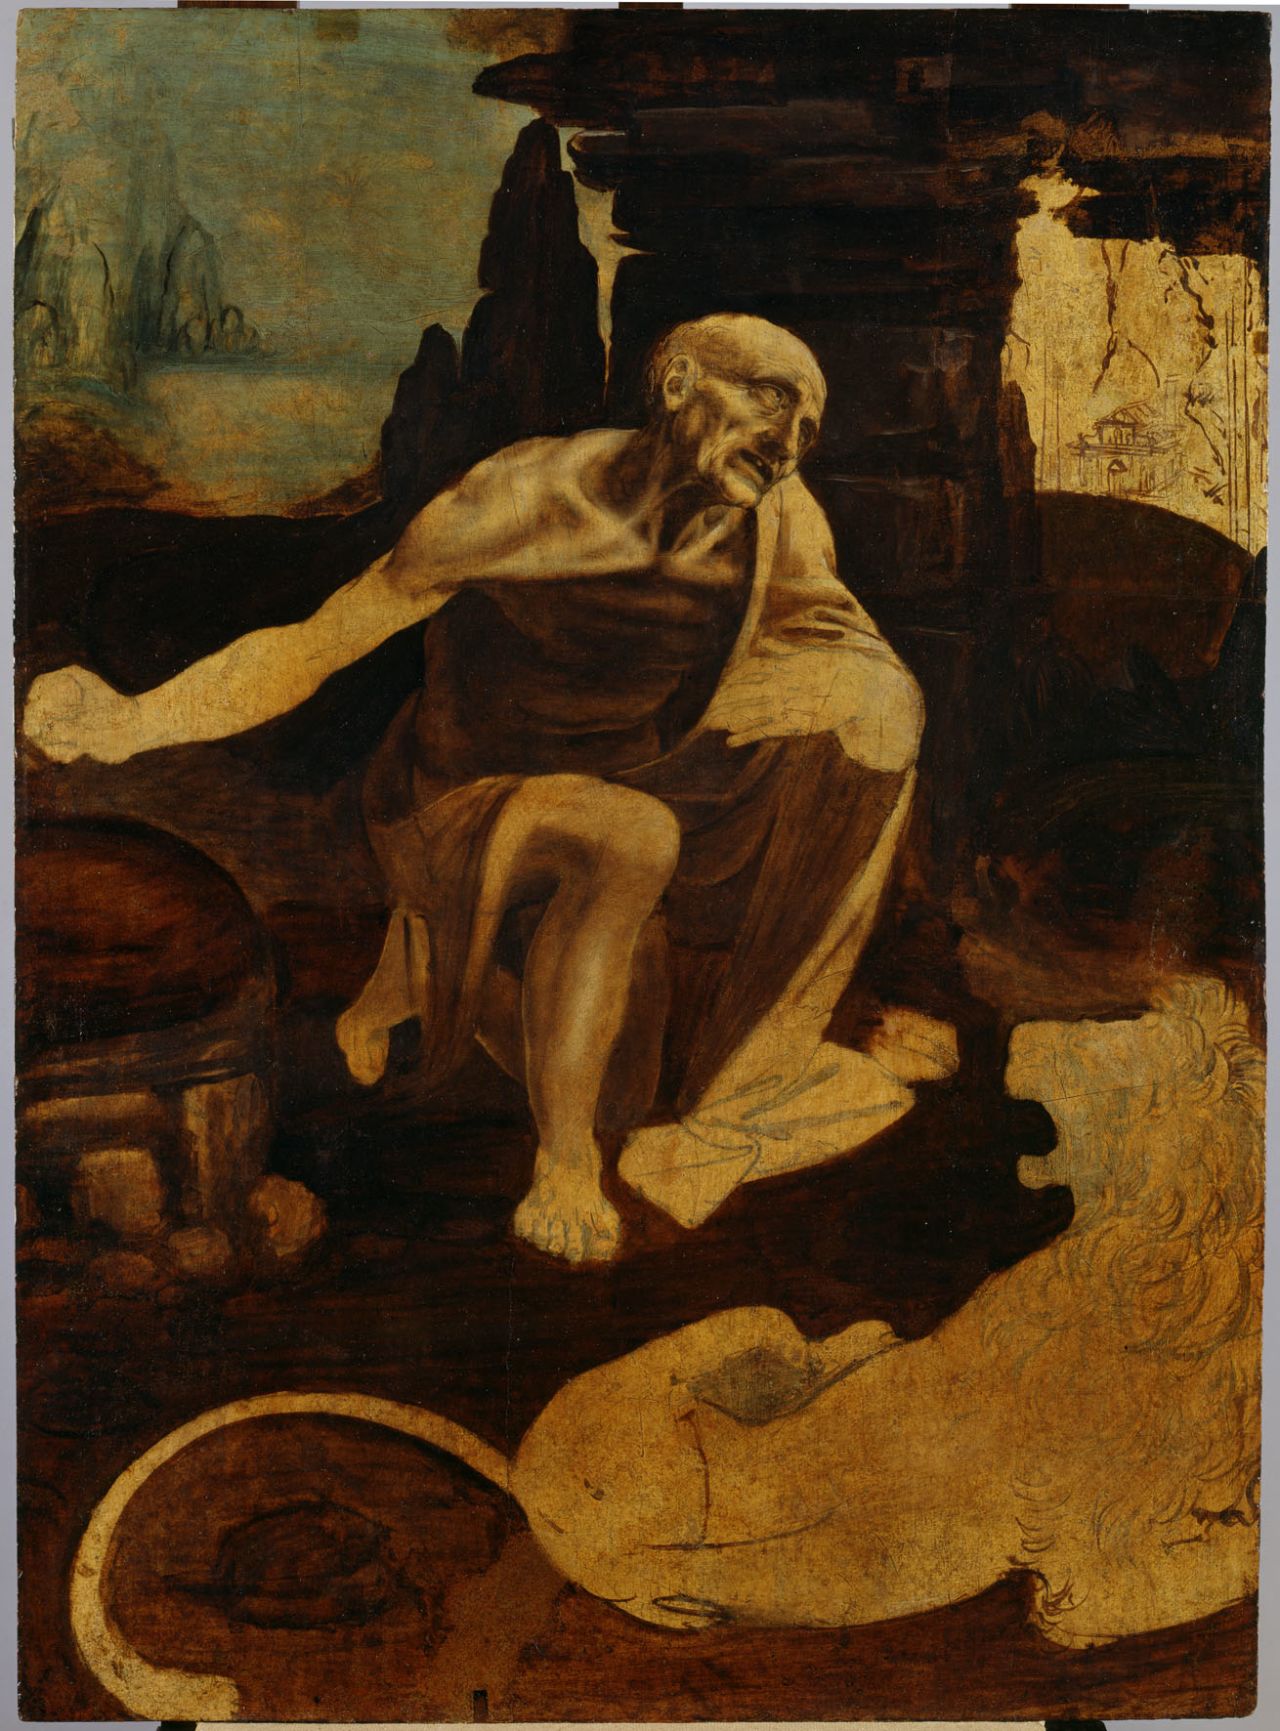 The exhibition at London's National Gallery features nine paintings by Leonardo da Vinci as well as numerous drawings. Pictured is the unfinished painting, "Saint Jerome" (c.1488-90).